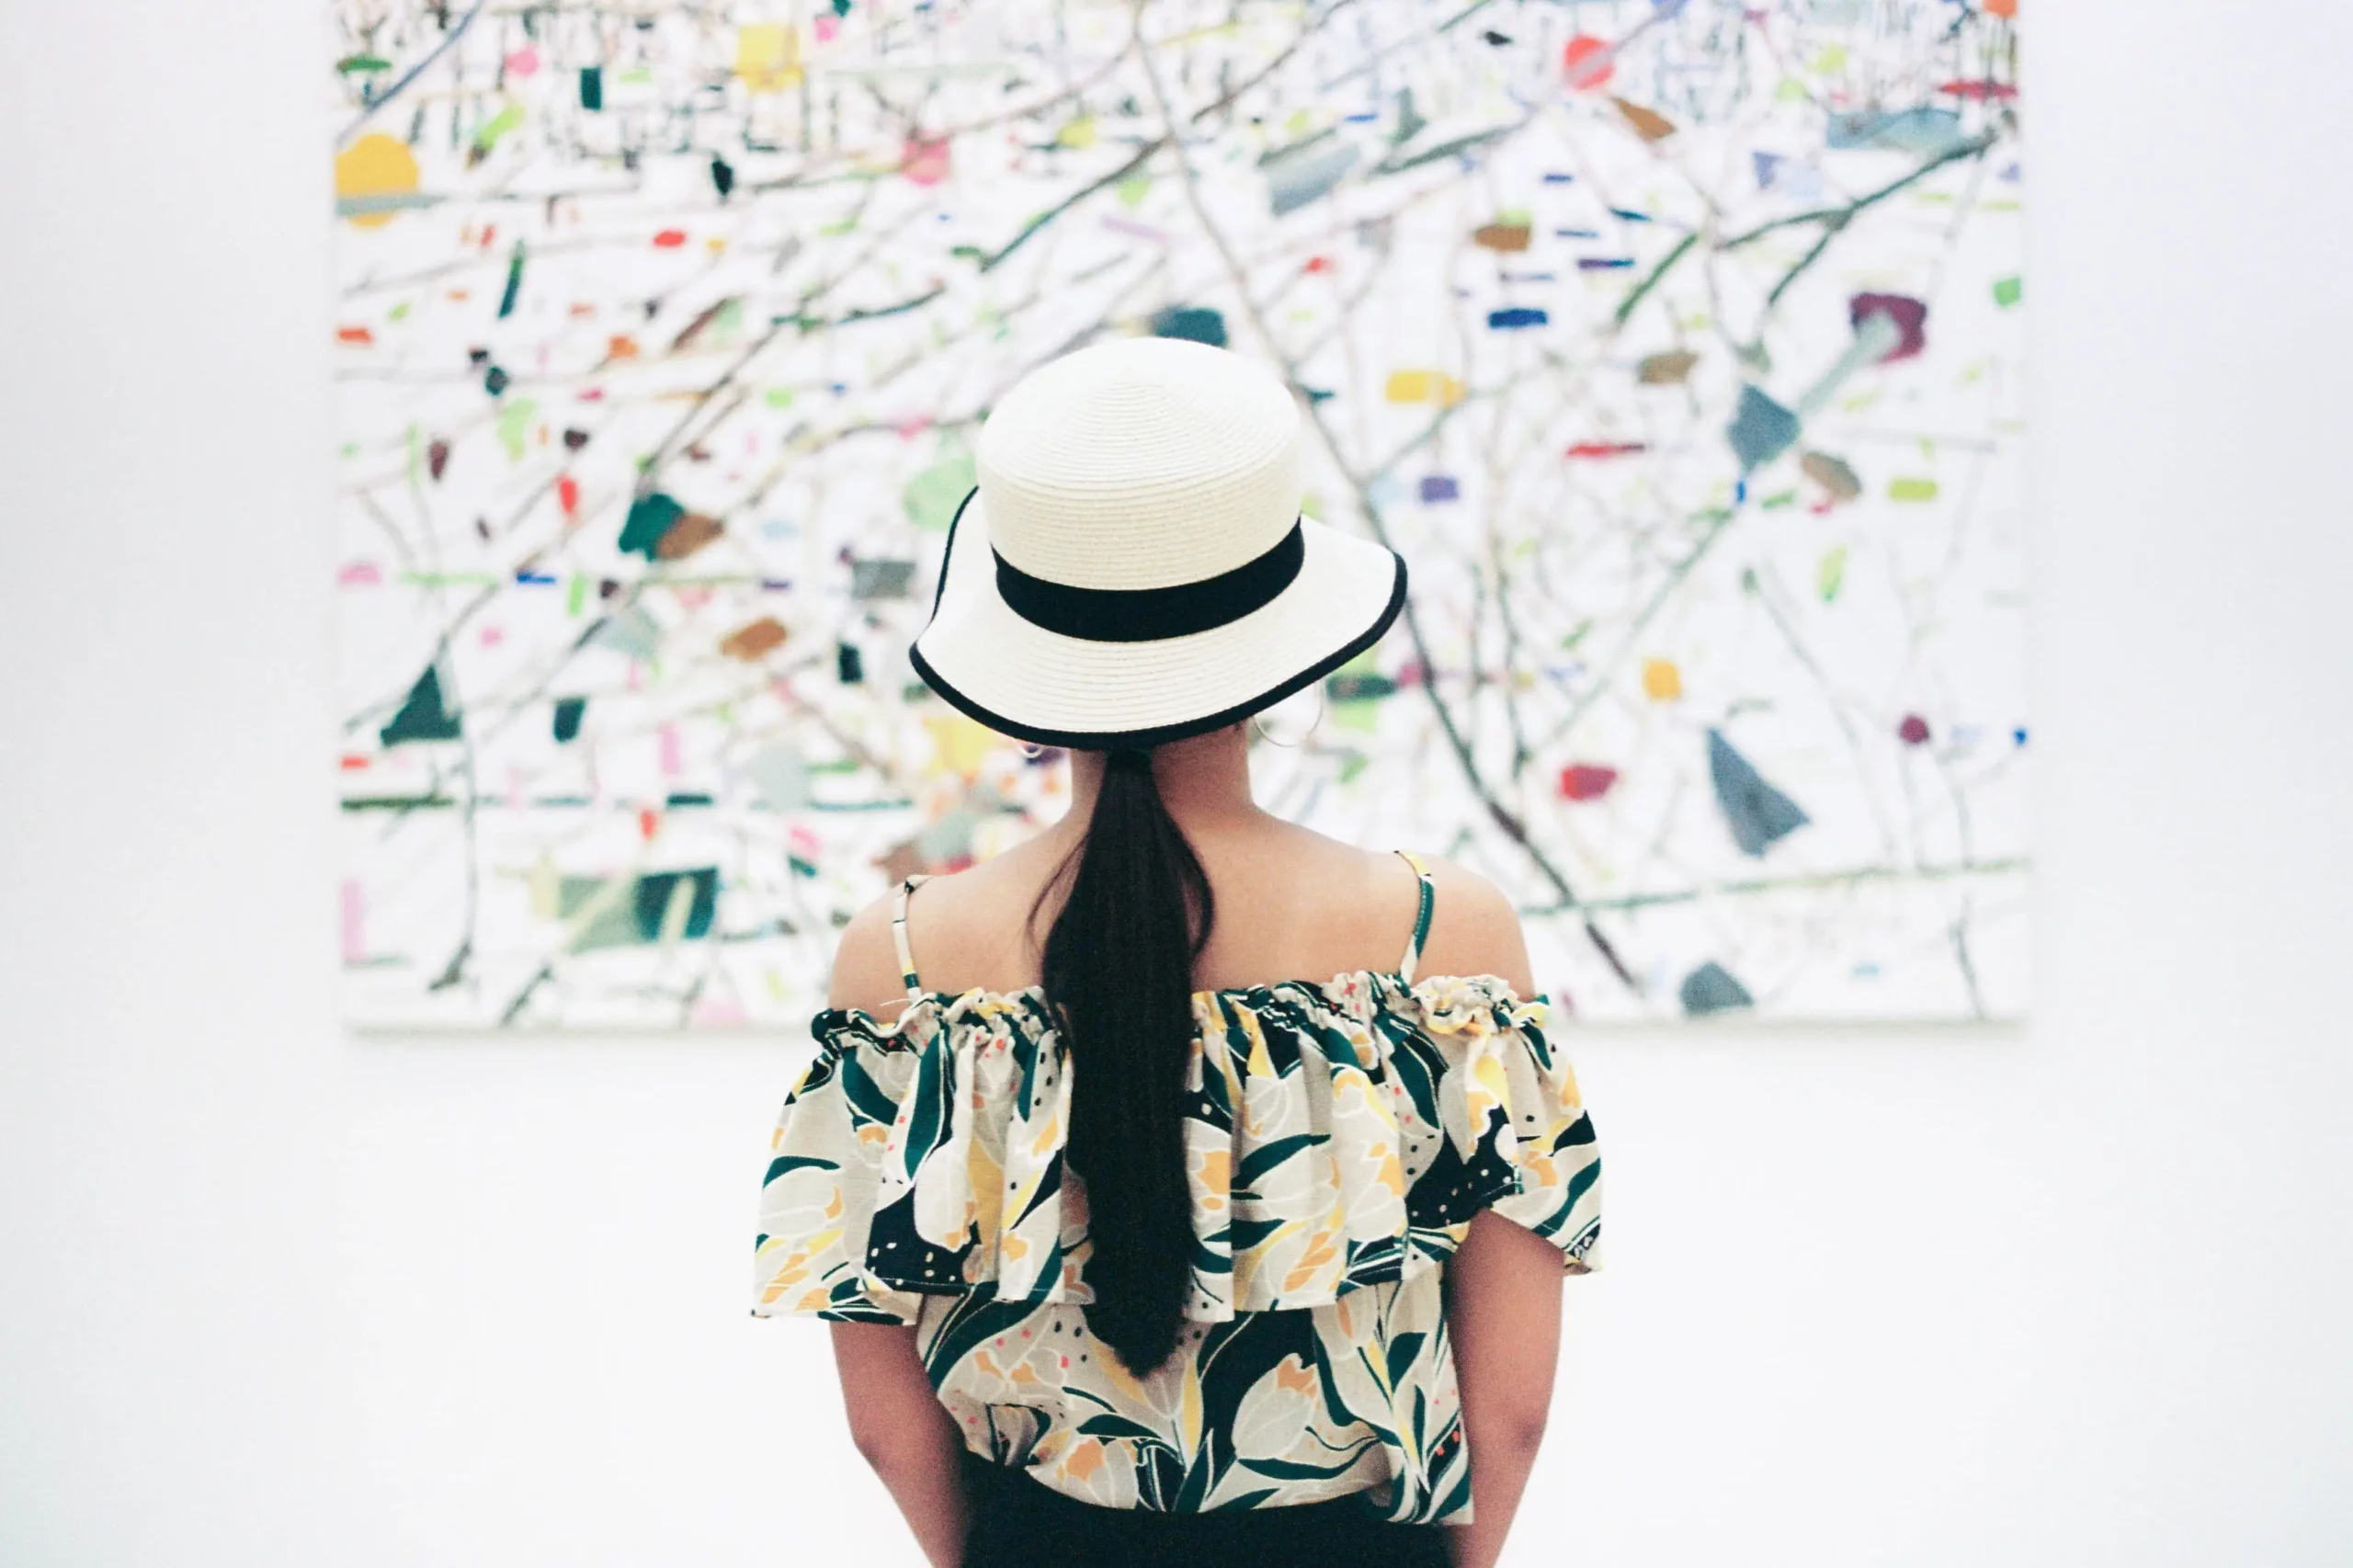 Woman observing abstract art in a gallery, wearing a floral dress and a white hat